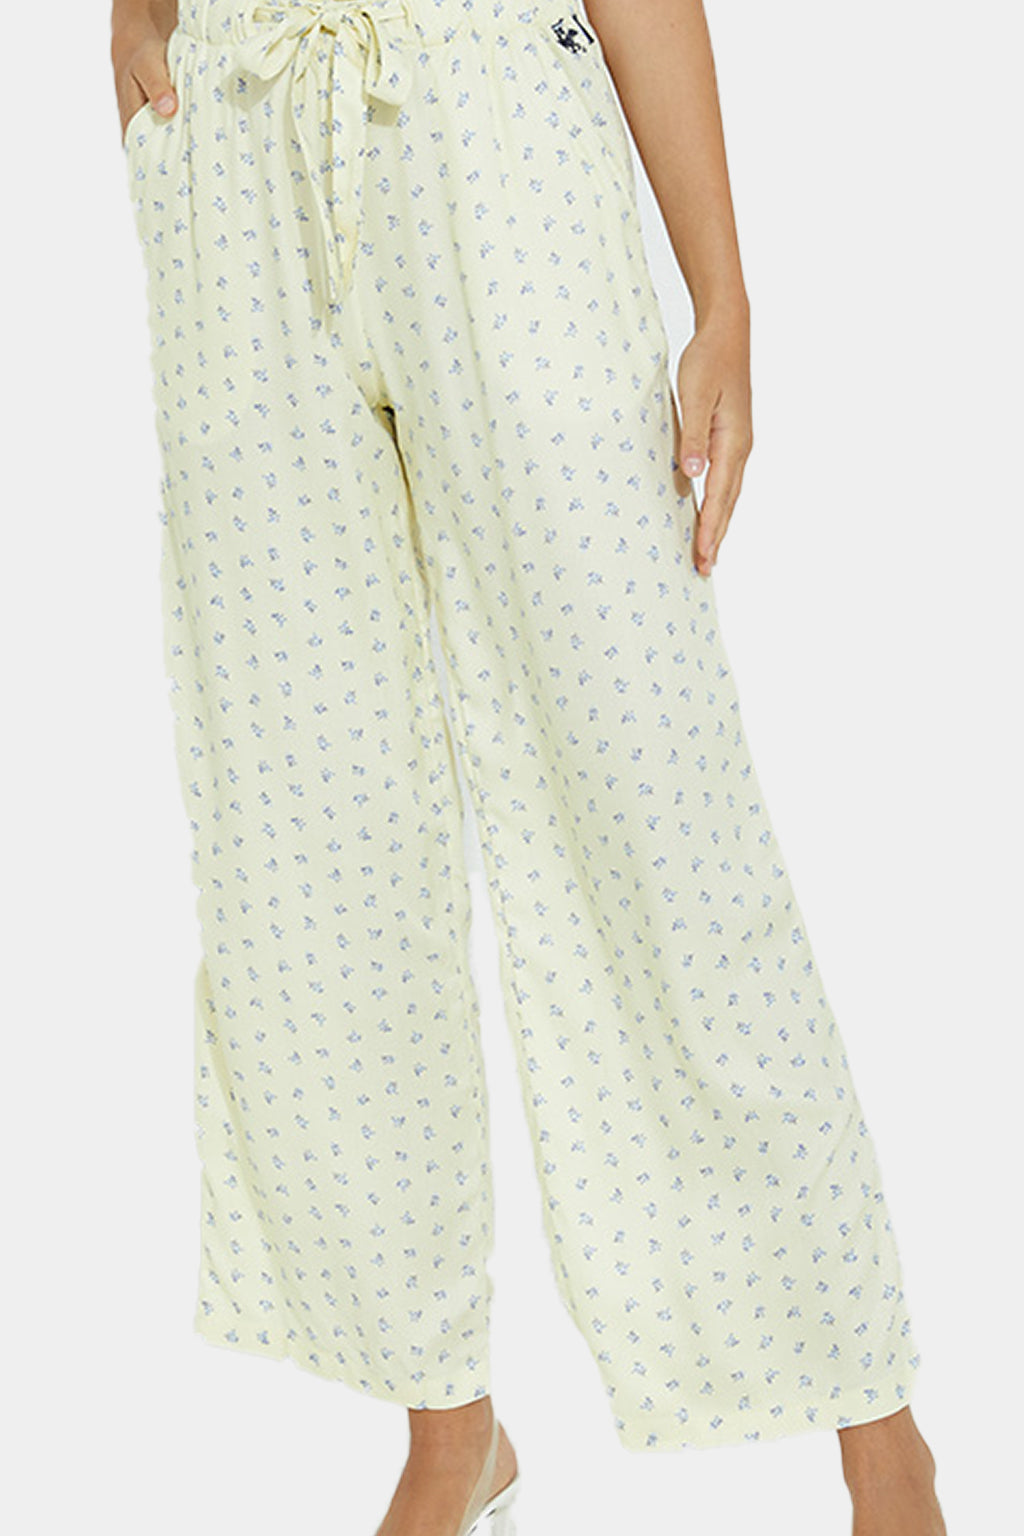 Beverly Hills Polo Club -  Printed Paper Bag Pants